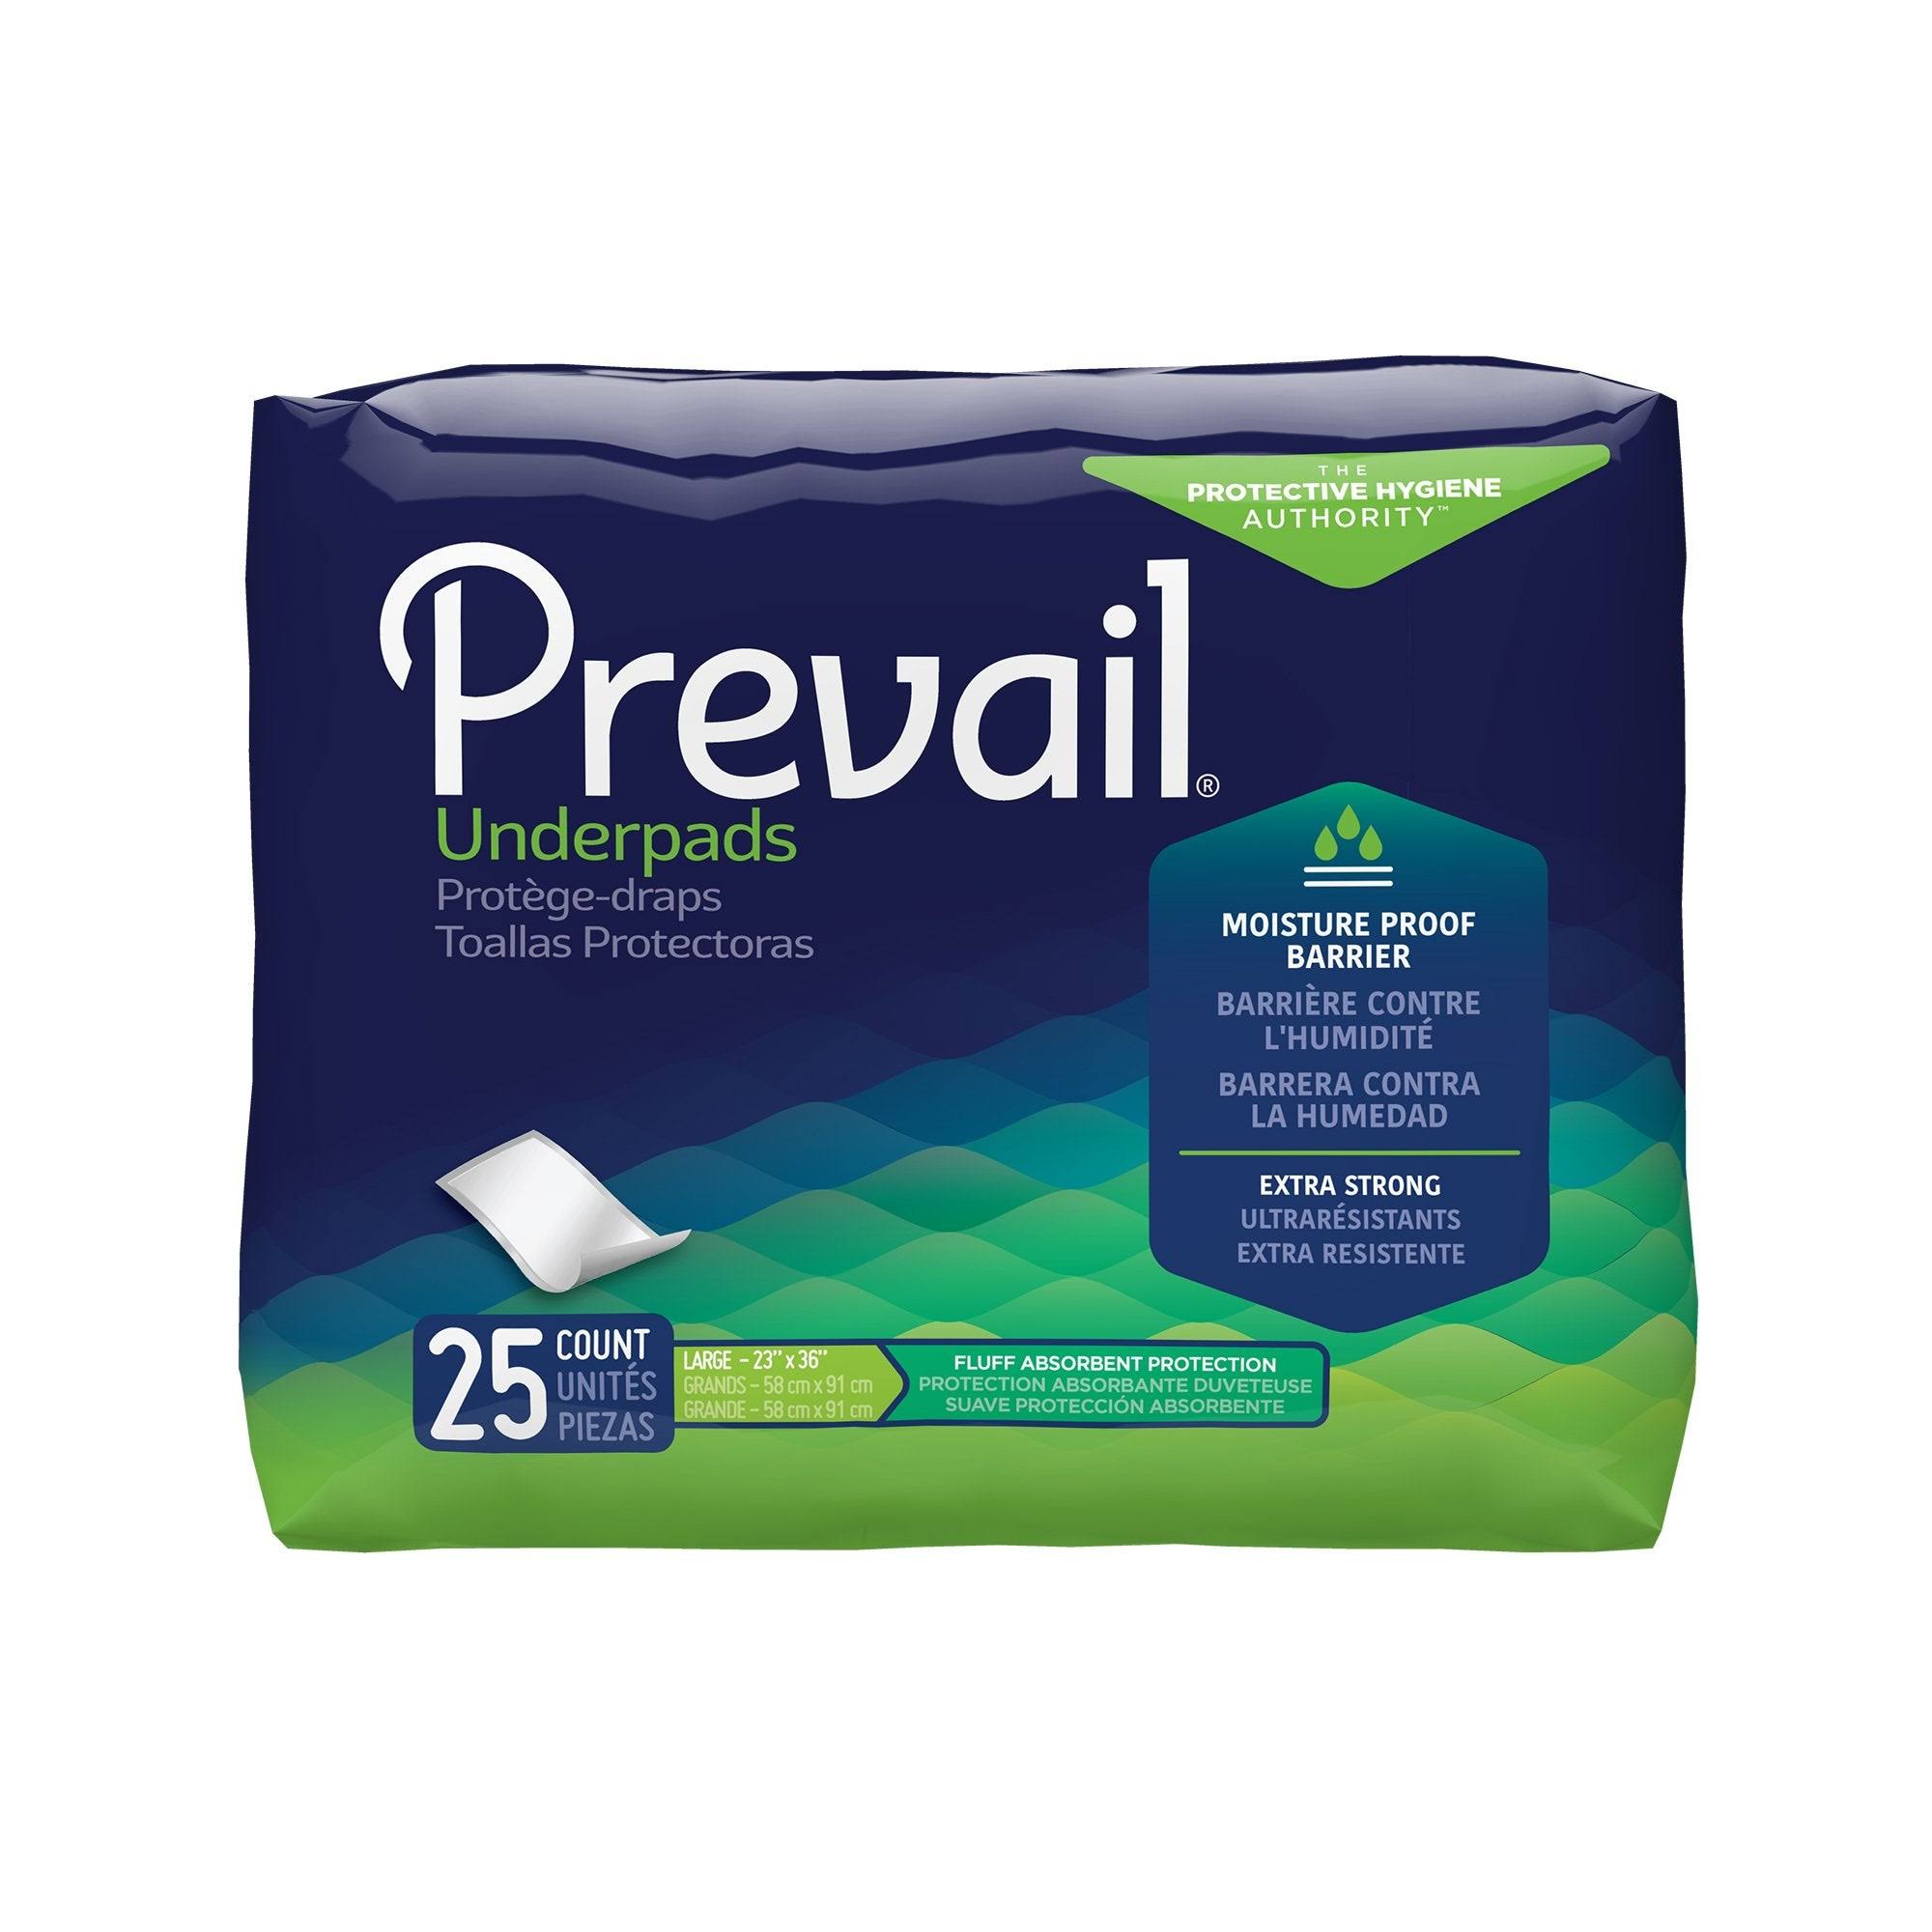 Underpad Prevail Total Care 23 x 36 inch Disposable Fluff Light Absorbency